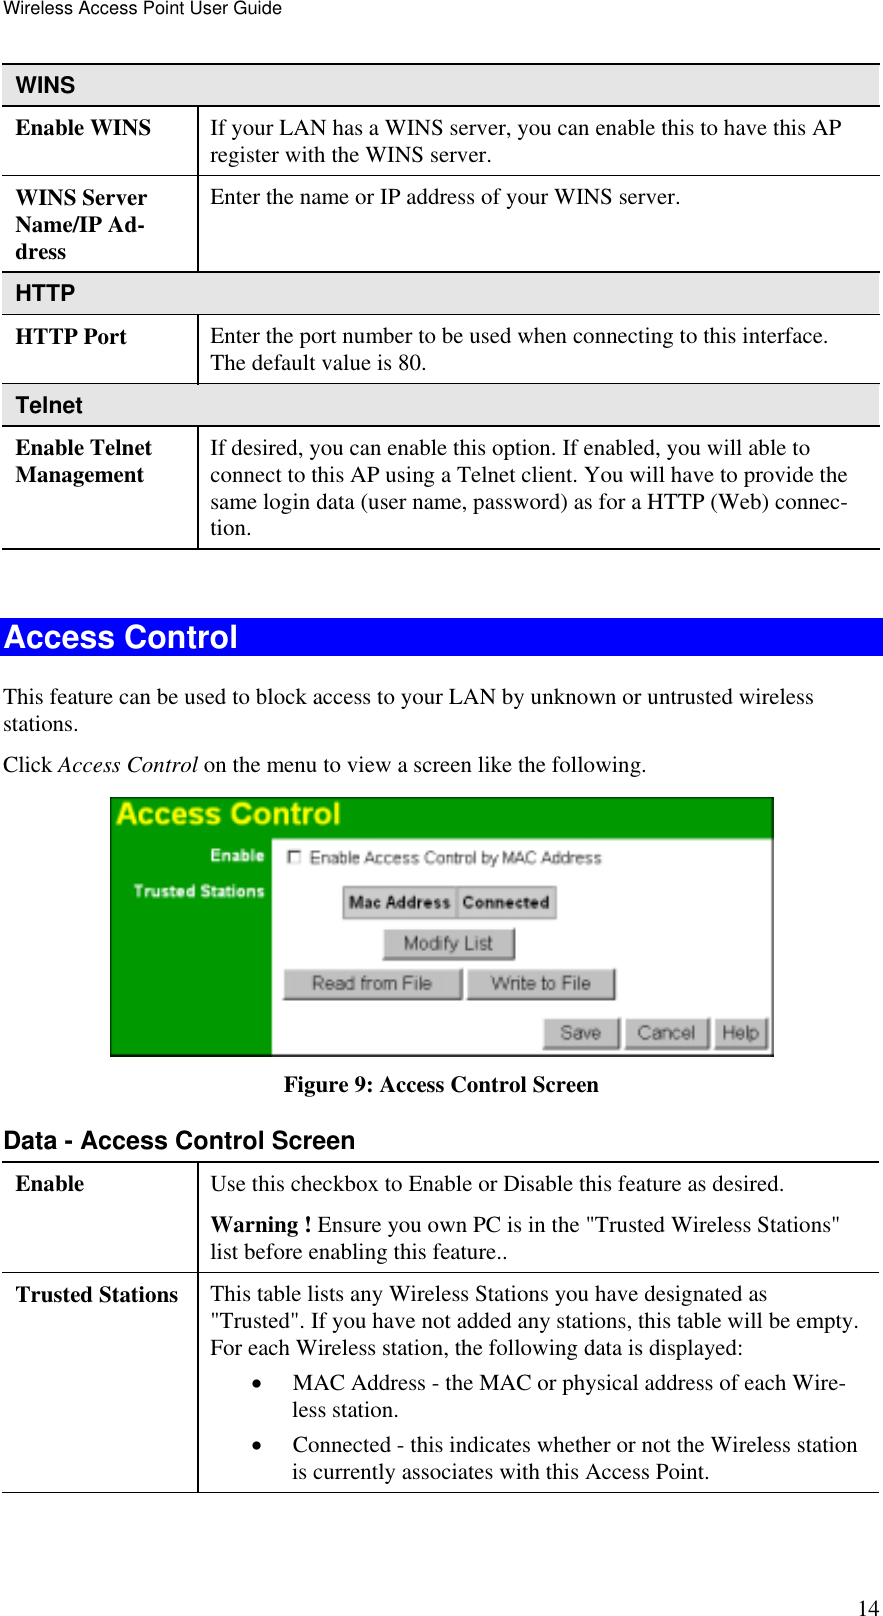 Wireless Access Point User Guide 14 WINS Enable WINS  If your LAN has a WINS server, you can enable this to have this AP register with the WINS server. WINS Server Name/IP Ad-dress Enter the name or IP address of your WINS server. HTTP HTTP Port  Enter the port number to be used when connecting to this interface. The default value is 80. Telnet Enable Telnet Management  If desired, you can enable this option. If enabled, you will able to connect to this AP using a Telnet client. You will have to provide the same login data (user name, password) as for a HTTP (Web) connec-tion.  Access Control This feature can be used to block access to your LAN by unknown or untrusted wireless stations. Click Access Control on the menu to view a screen like the following.  Figure 9: Access Control Screen Data - Access Control Screen Enable  Use this checkbox to Enable or Disable this feature as desired. Warning ! Ensure you own PC is in the &quot;Trusted Wireless Stations&quot; list before enabling this feature.. Trusted Stations This table lists any Wireless Stations you have designated as &quot;Trusted&quot;. If you have not added any stations, this table will be empty. For each Wireless station, the following data is displayed: •  MAC Address - the MAC or physical address of each Wire-less station. •  Connected - this indicates whether or not the Wireless station is currently associates with this Access Point. 